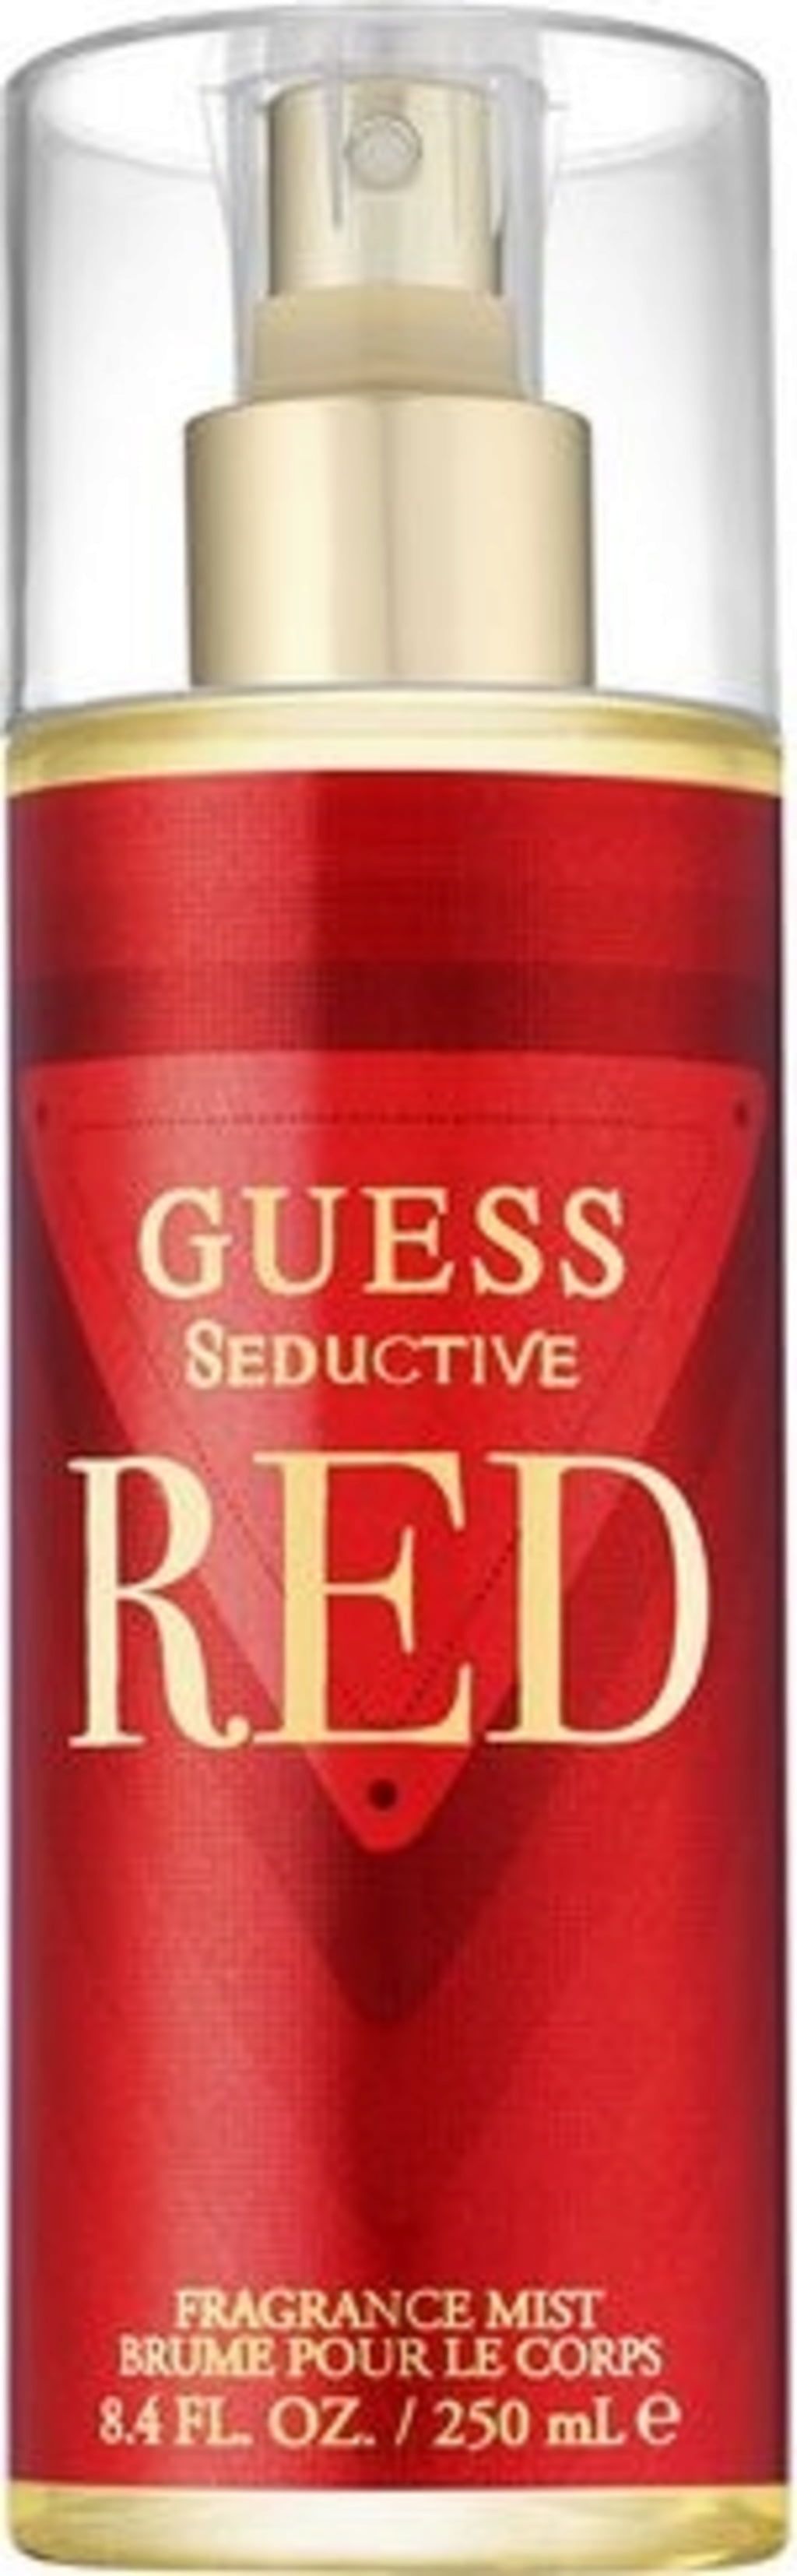 Buy Guess Seductive Body Mist (250ml) Online at Best Price in India - Tira